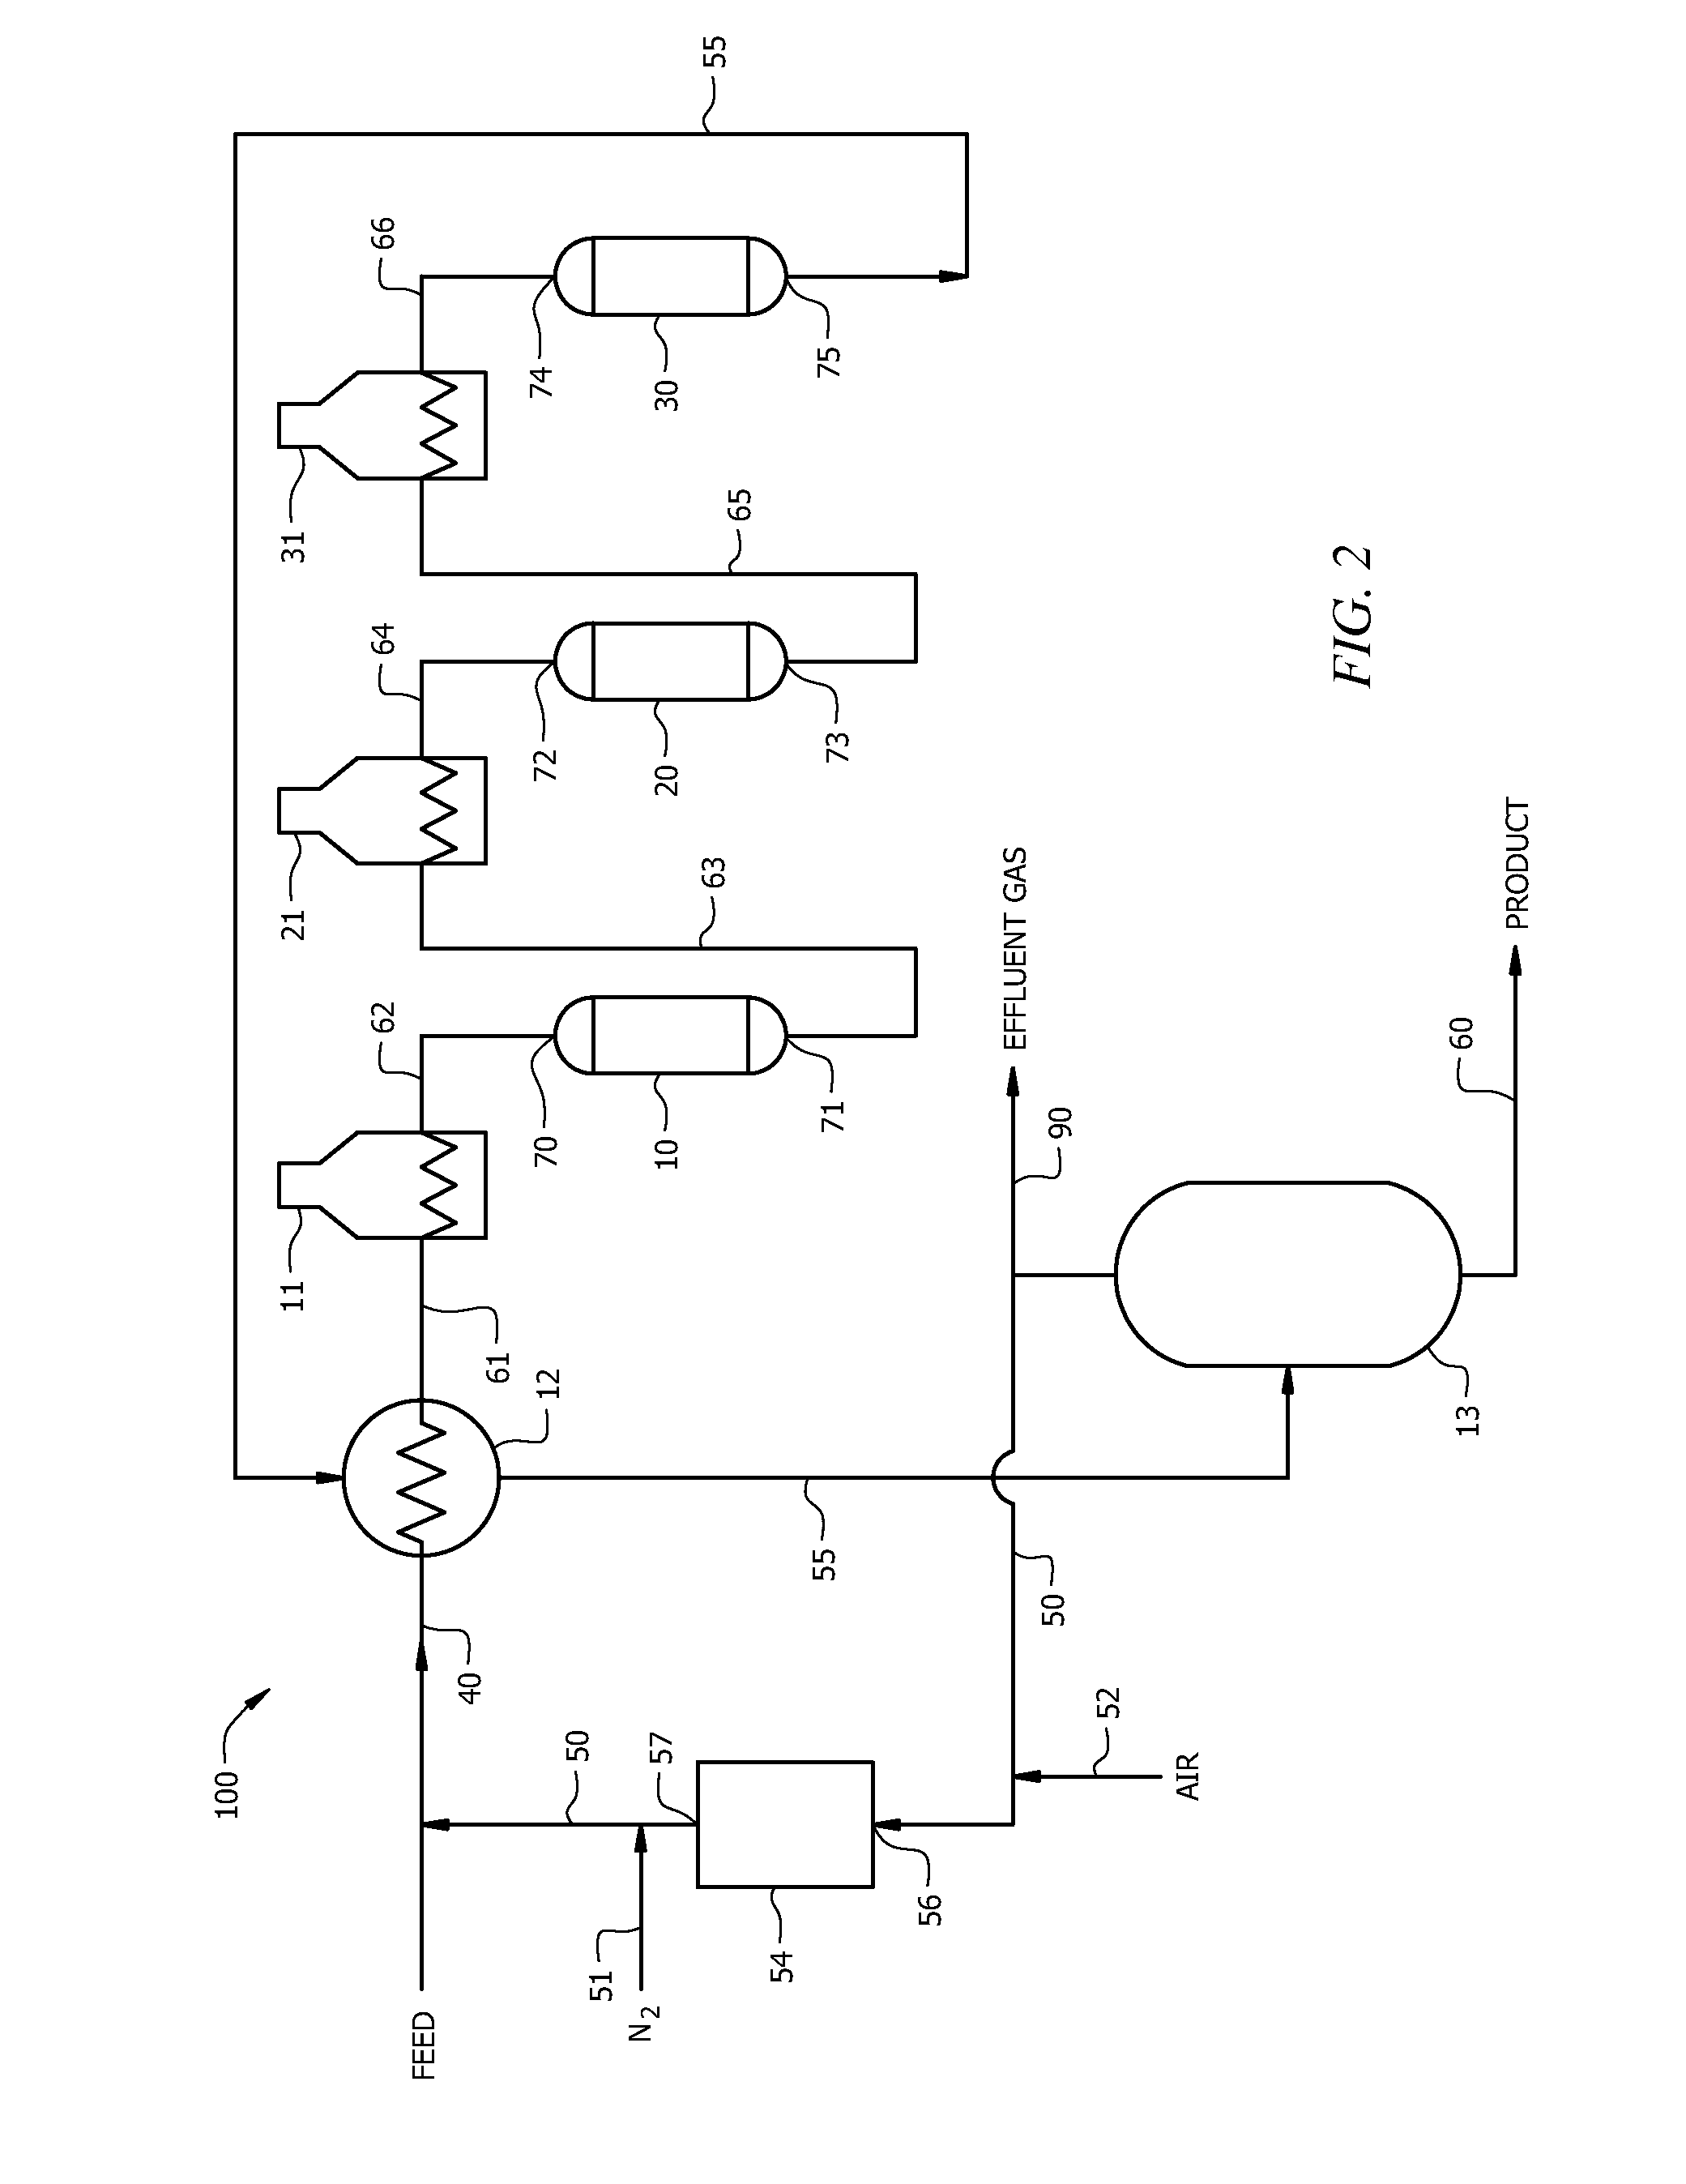 Method of treating a catalytic reactor system prior to reactor servicing